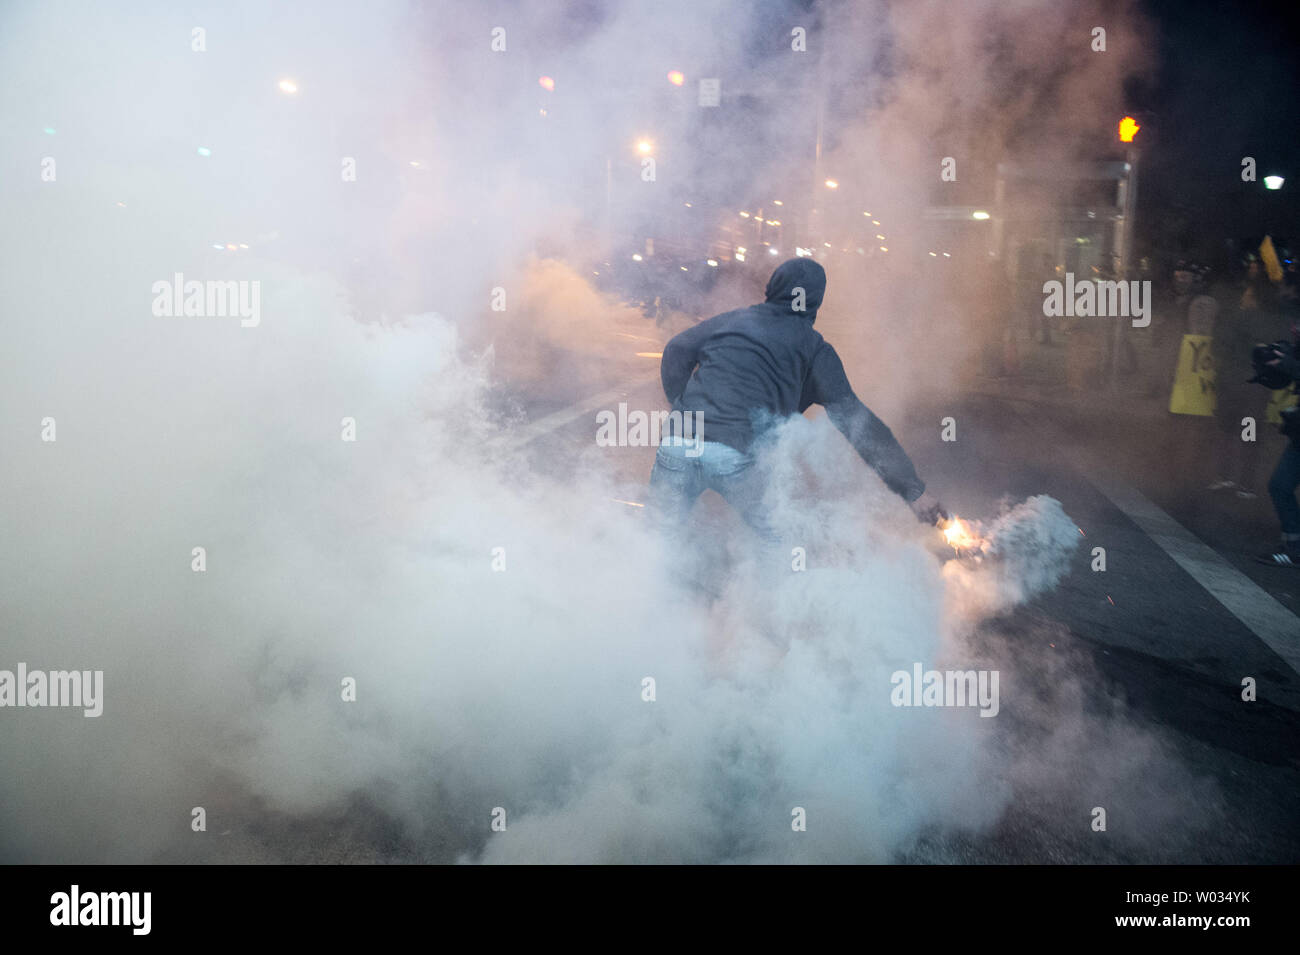 A protestor picks up a smoke canister and throws it back at the police at Pennsylvania Ave and North Ave in Baltimore as the 10pm curfew grew closer in Baltimore, Maryland on April 28, 2015.  Protests have erupted after death of Freddie Gray. Photo Ken Cedeno/UPI. Stock Photo